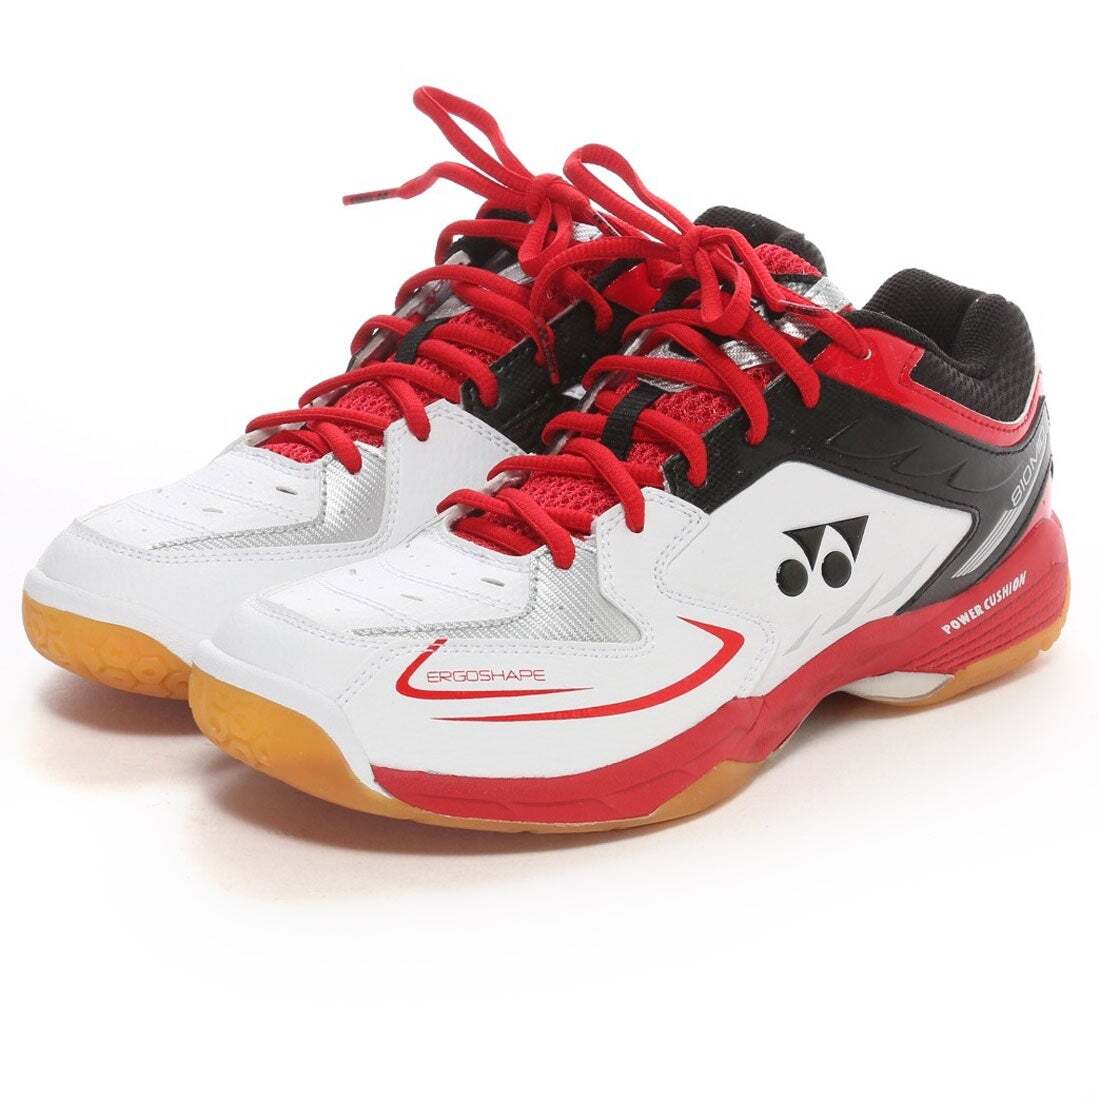  trying on degree super-beauty goods most light weight model Yonex Yonex badminton shoes power cushion 810 soft put on footwear feeling 27.5cm red 